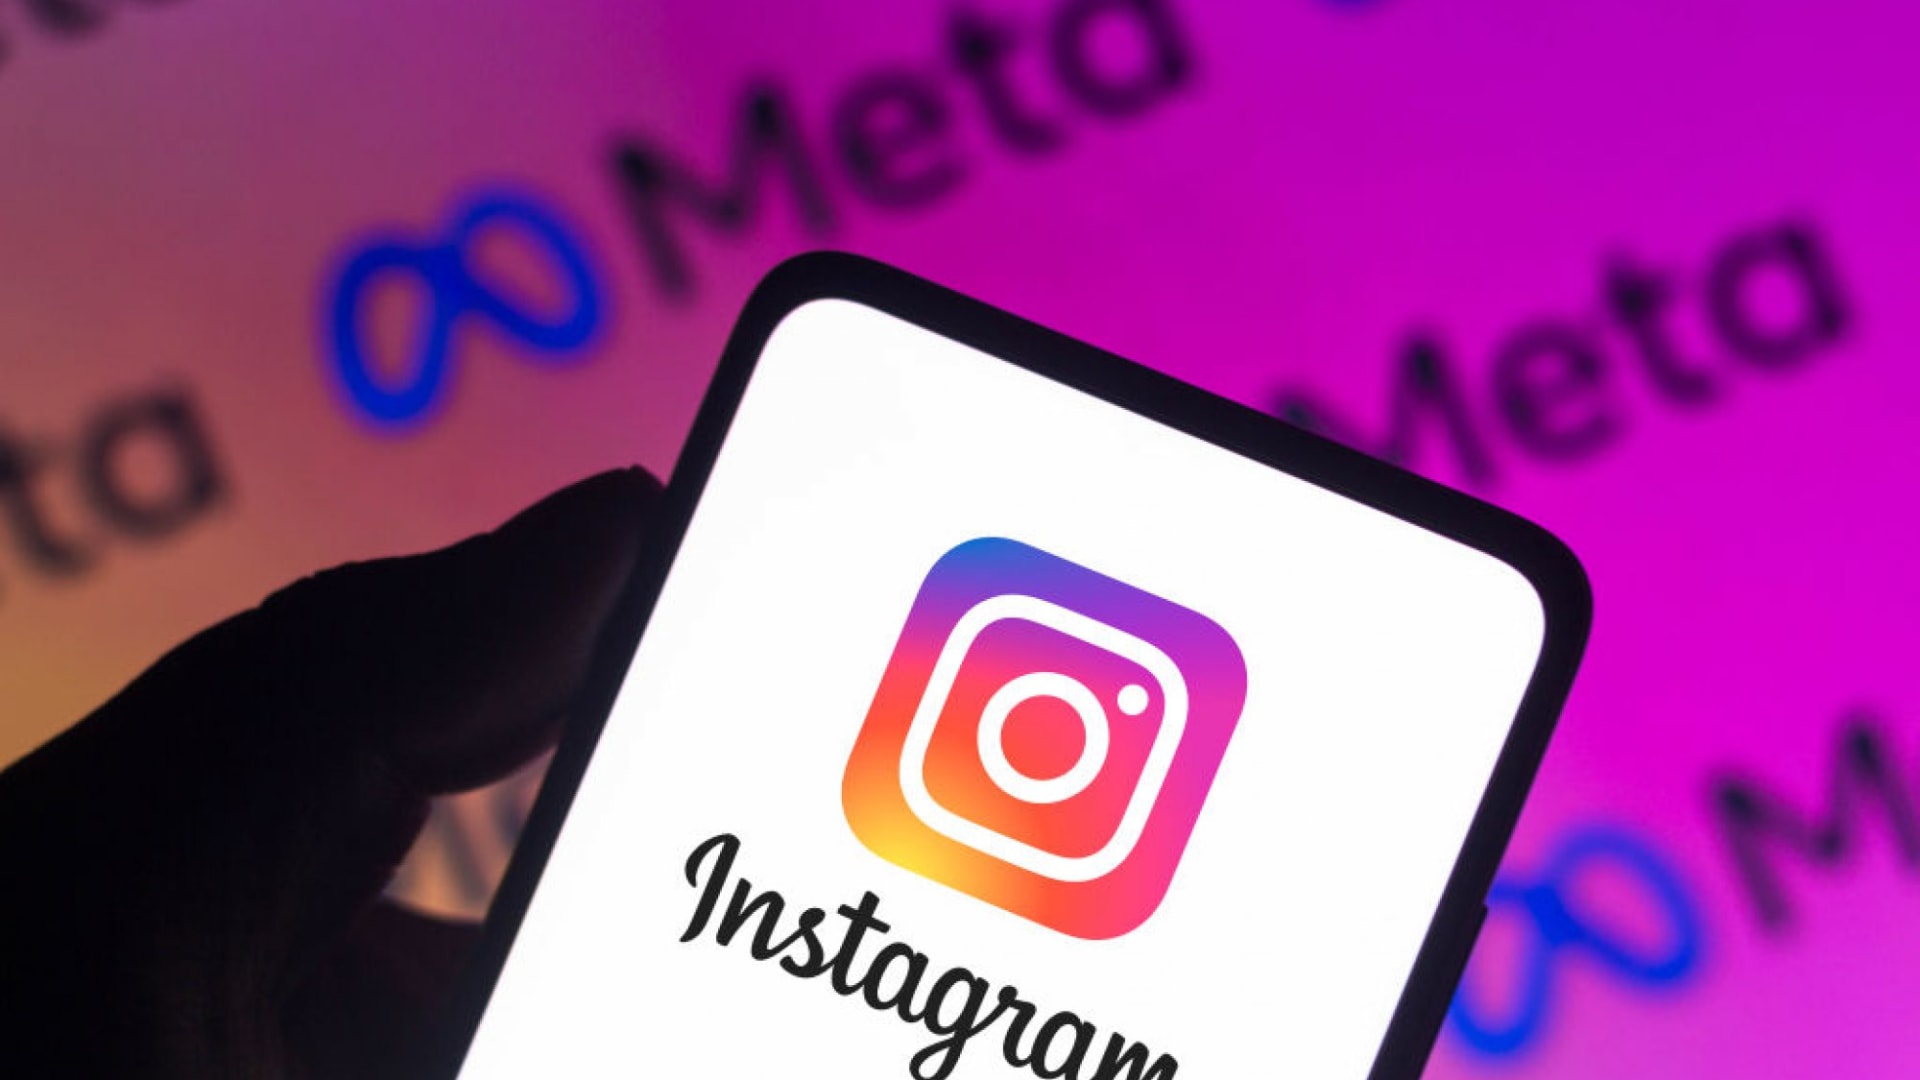 how to see who saved your instagram post